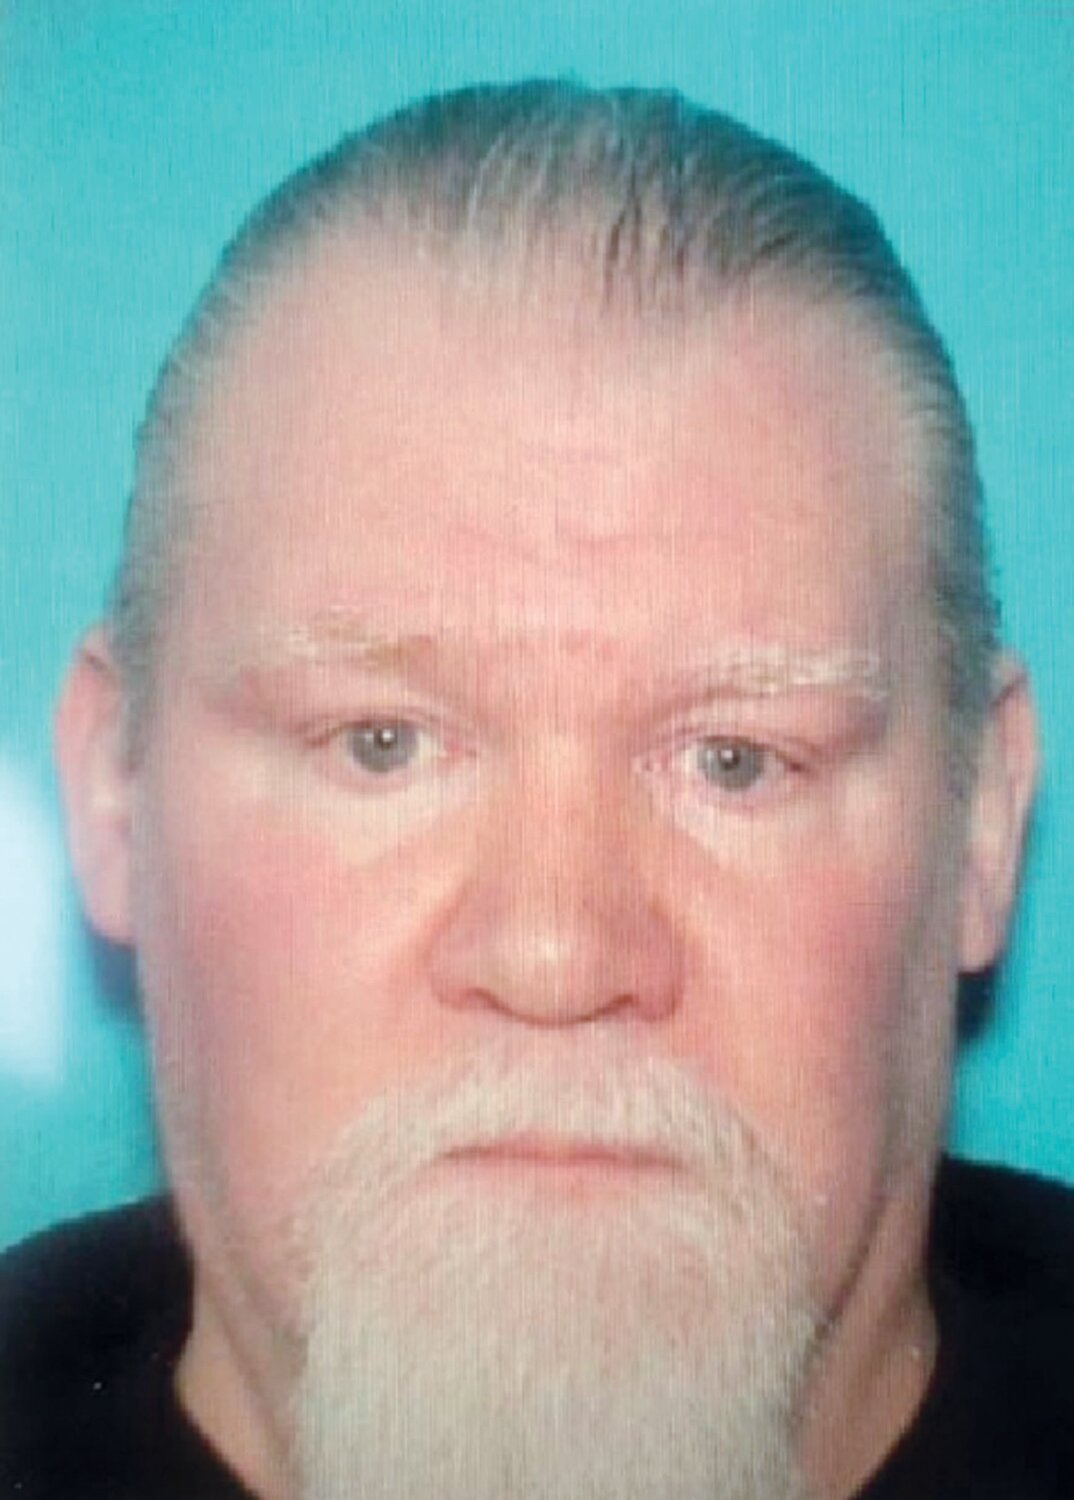 SUSPECT DEAD: Police shot and killed James Harrison, 52, of 4 Ligian Court, Johnston, following a triple shooting (double homicide), on May 24, 2023.